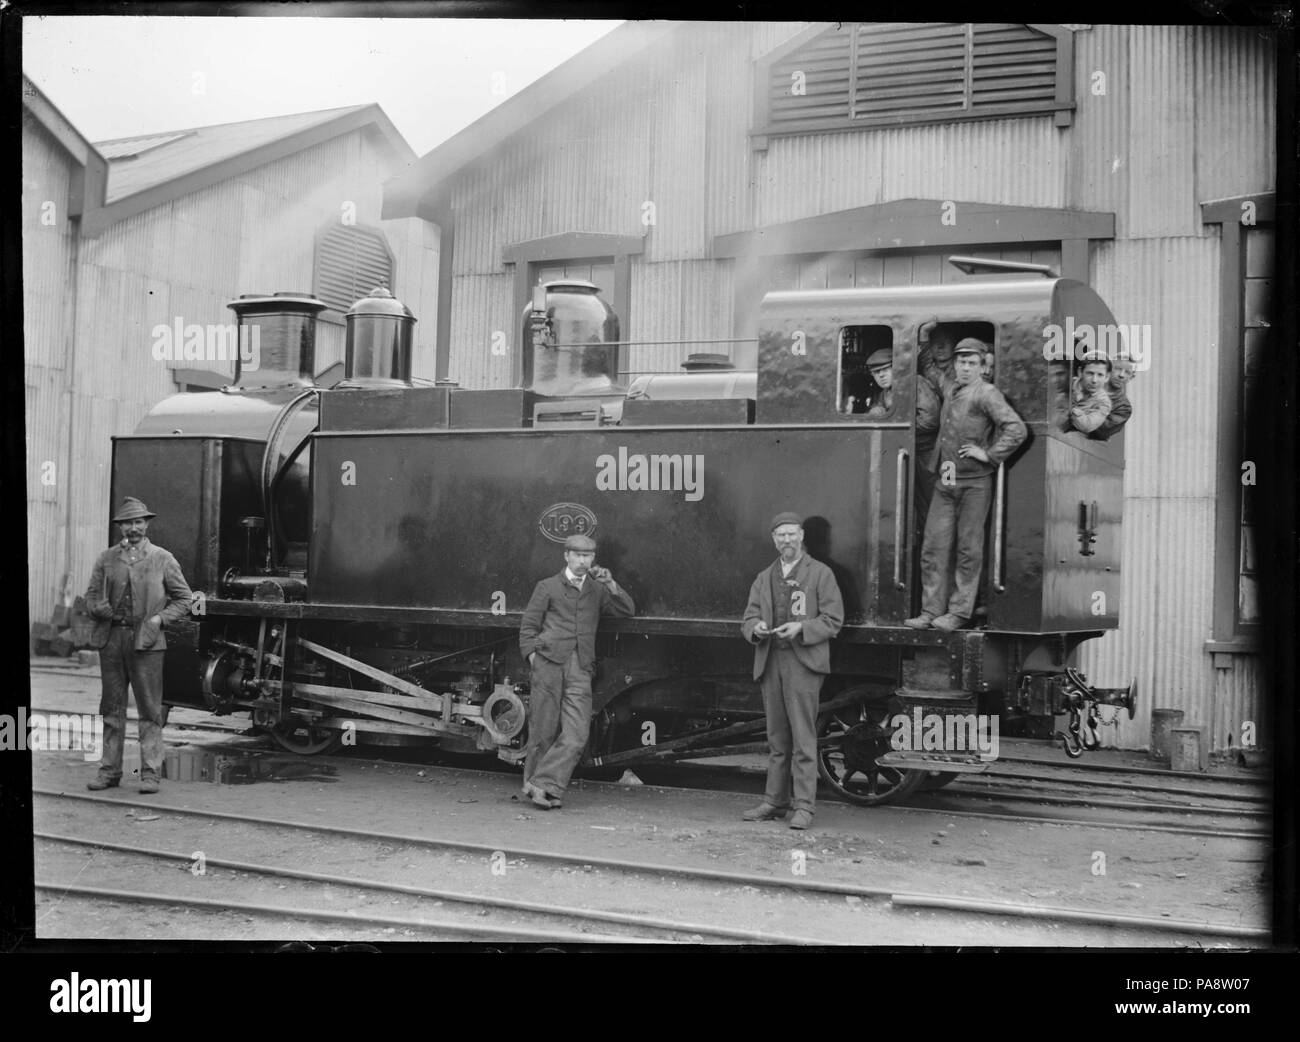 109 H class steam locomotive, NZR 199, 0-4-2T type, for use on the Fell system on the Rimutaka Incline, with a group of men standing on and beside the engine. ATLIB 285802 Stock Photo